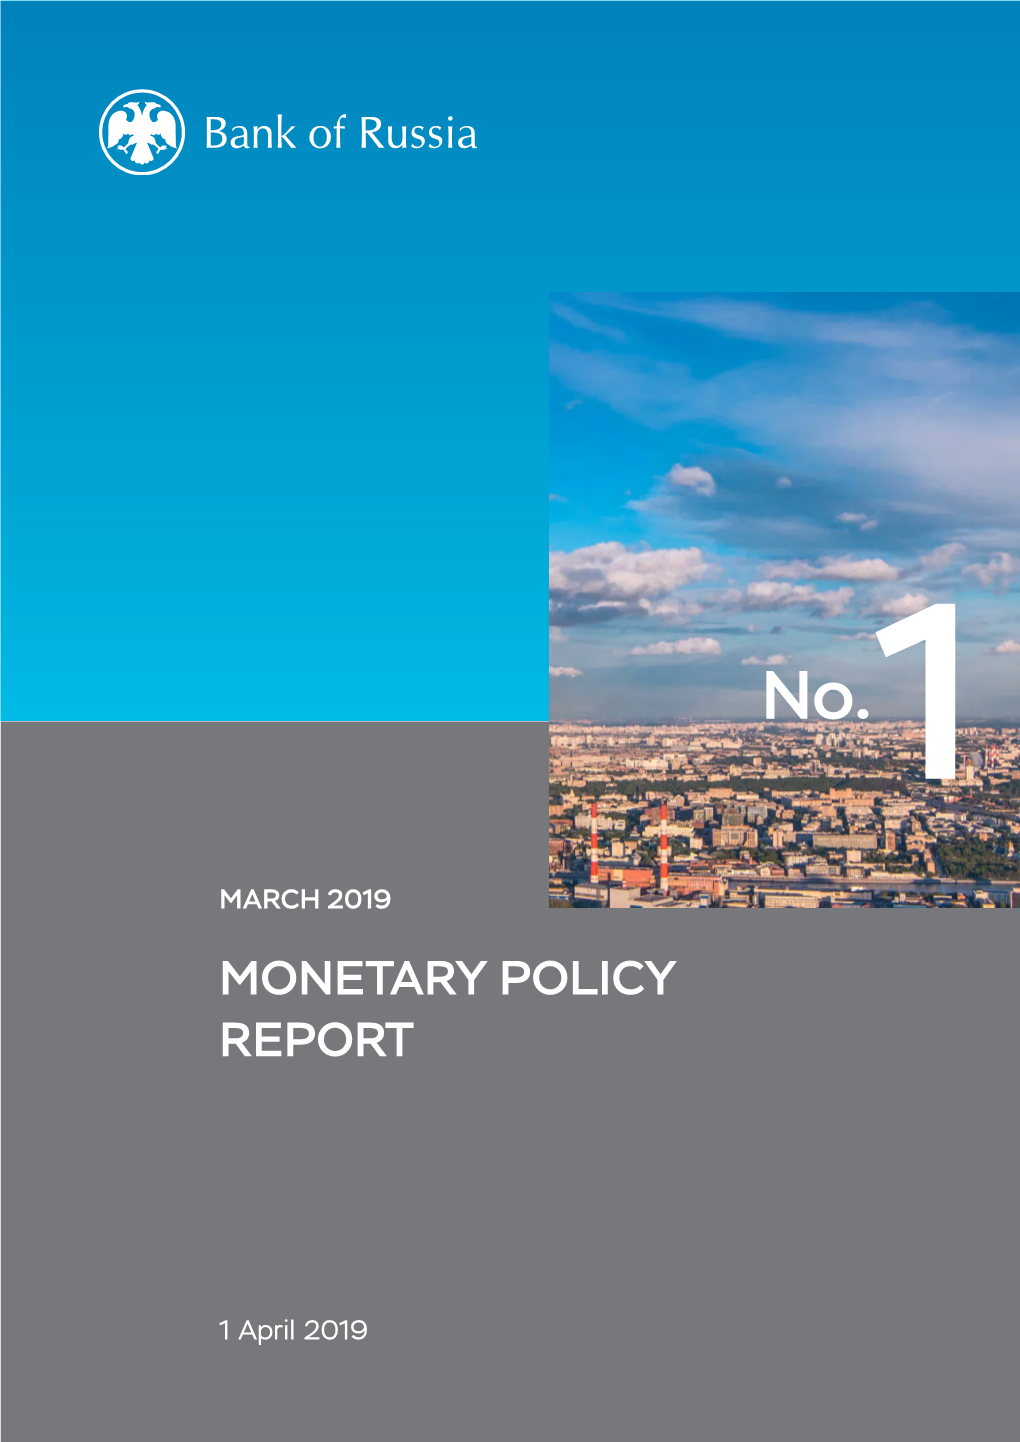 March 2019 MONETARY POLICY REPORT